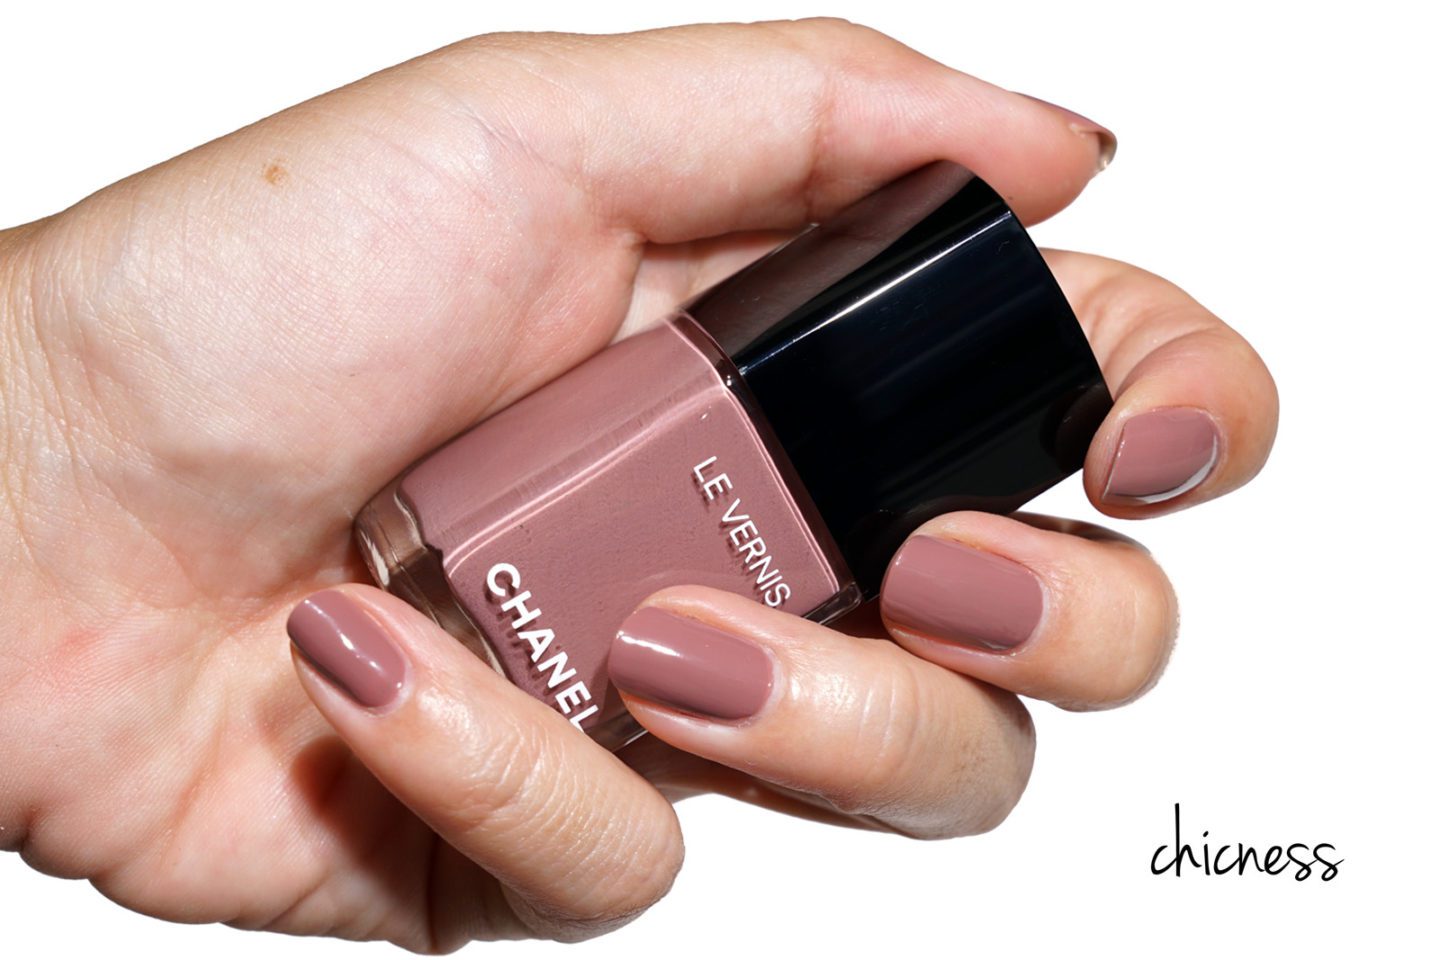 Chanel Le Vernis Swatch in Chicness